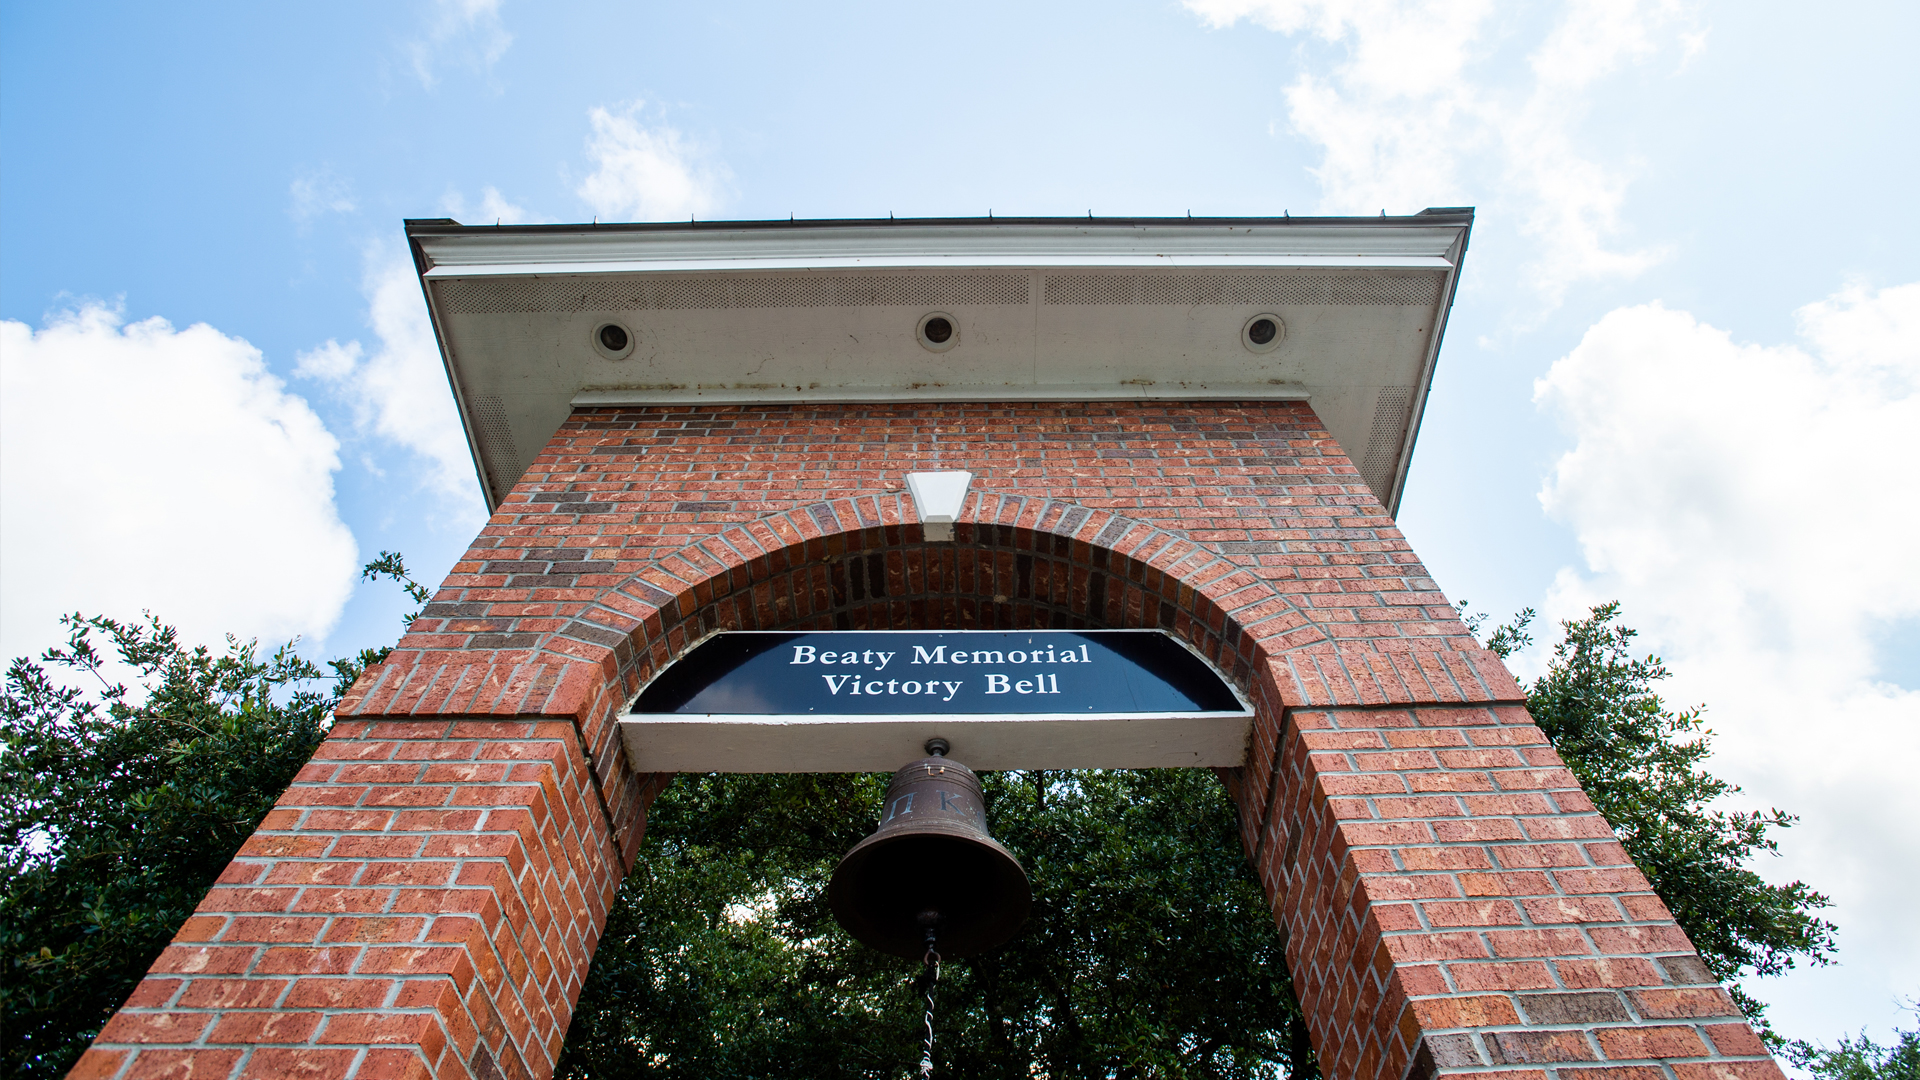 The Beaty Memorial Victory Bell is a beloved fixture and part of a great tradition on campus: It sounds off when rung by students celebrating a victory on the field of play and also as graduates commemorate receiving their diplomas.